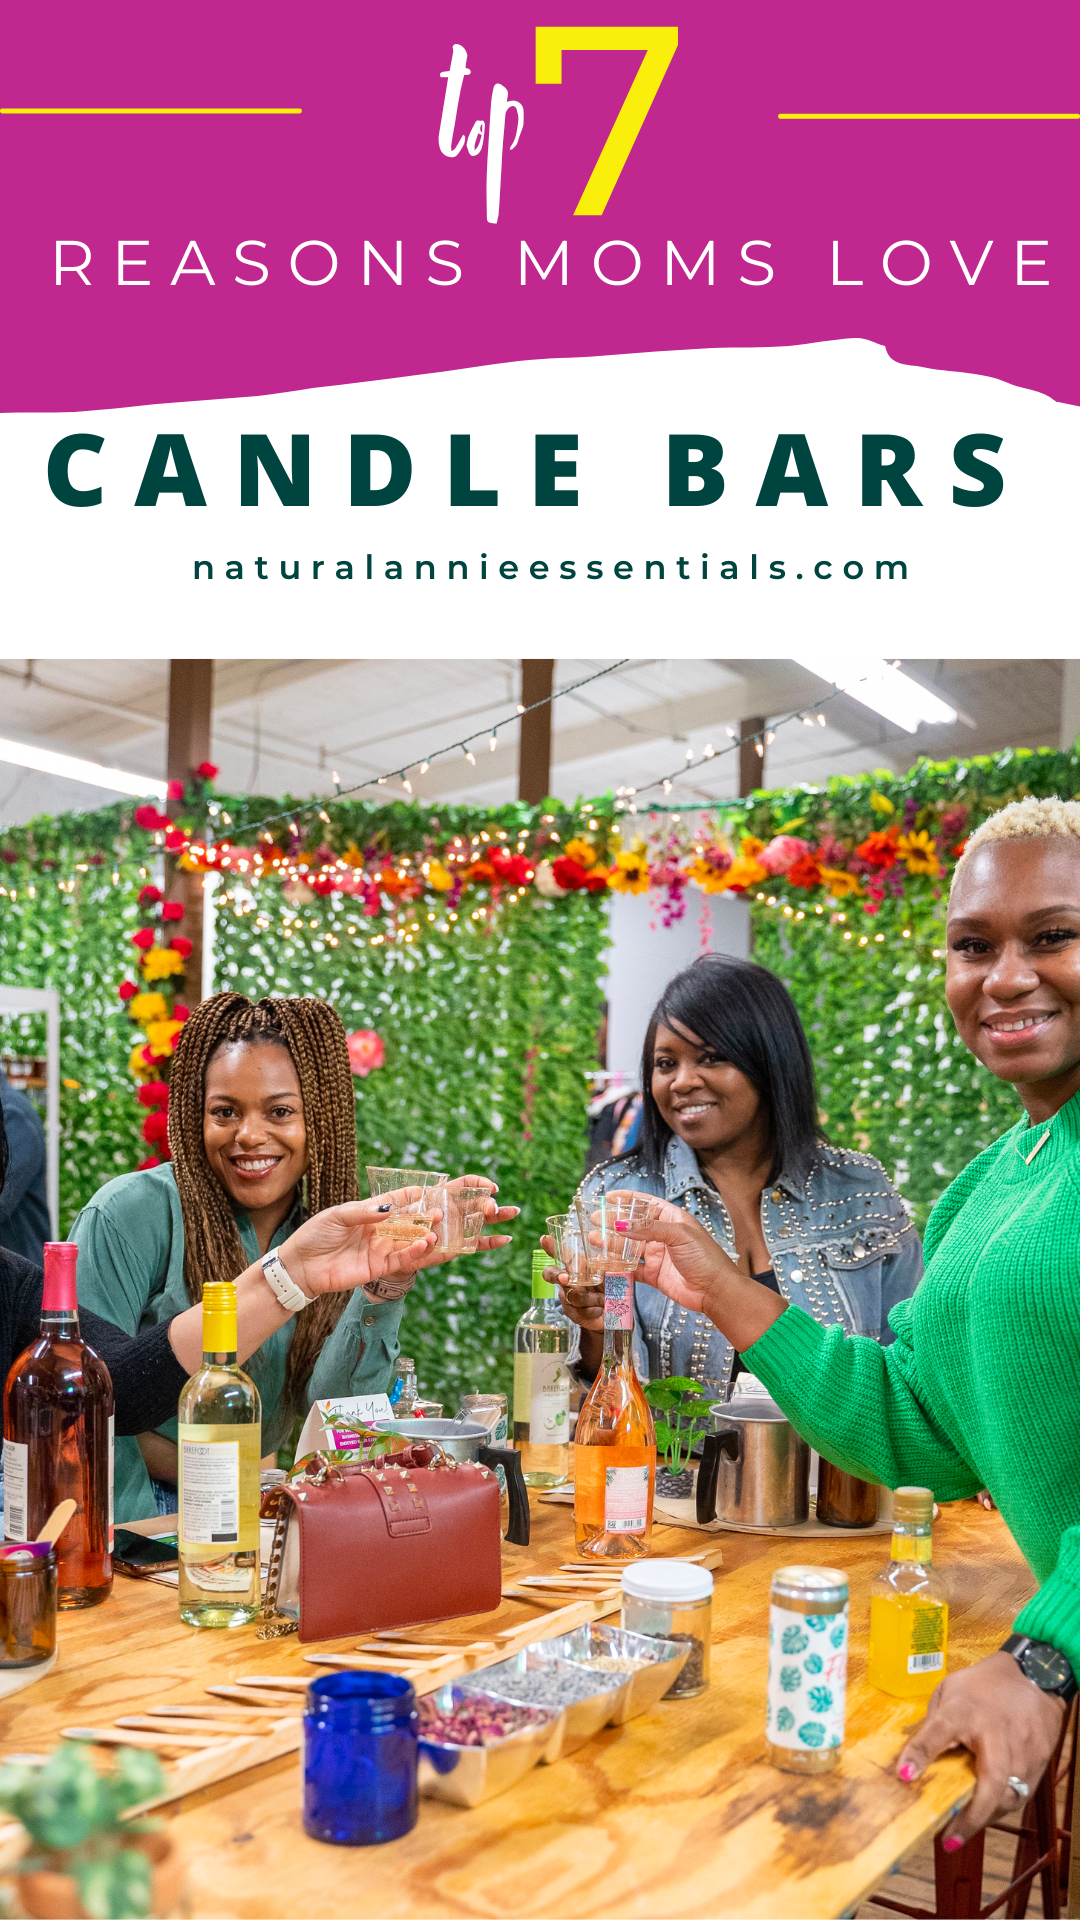 Top 7 Reasons Moms Love Candle Bars